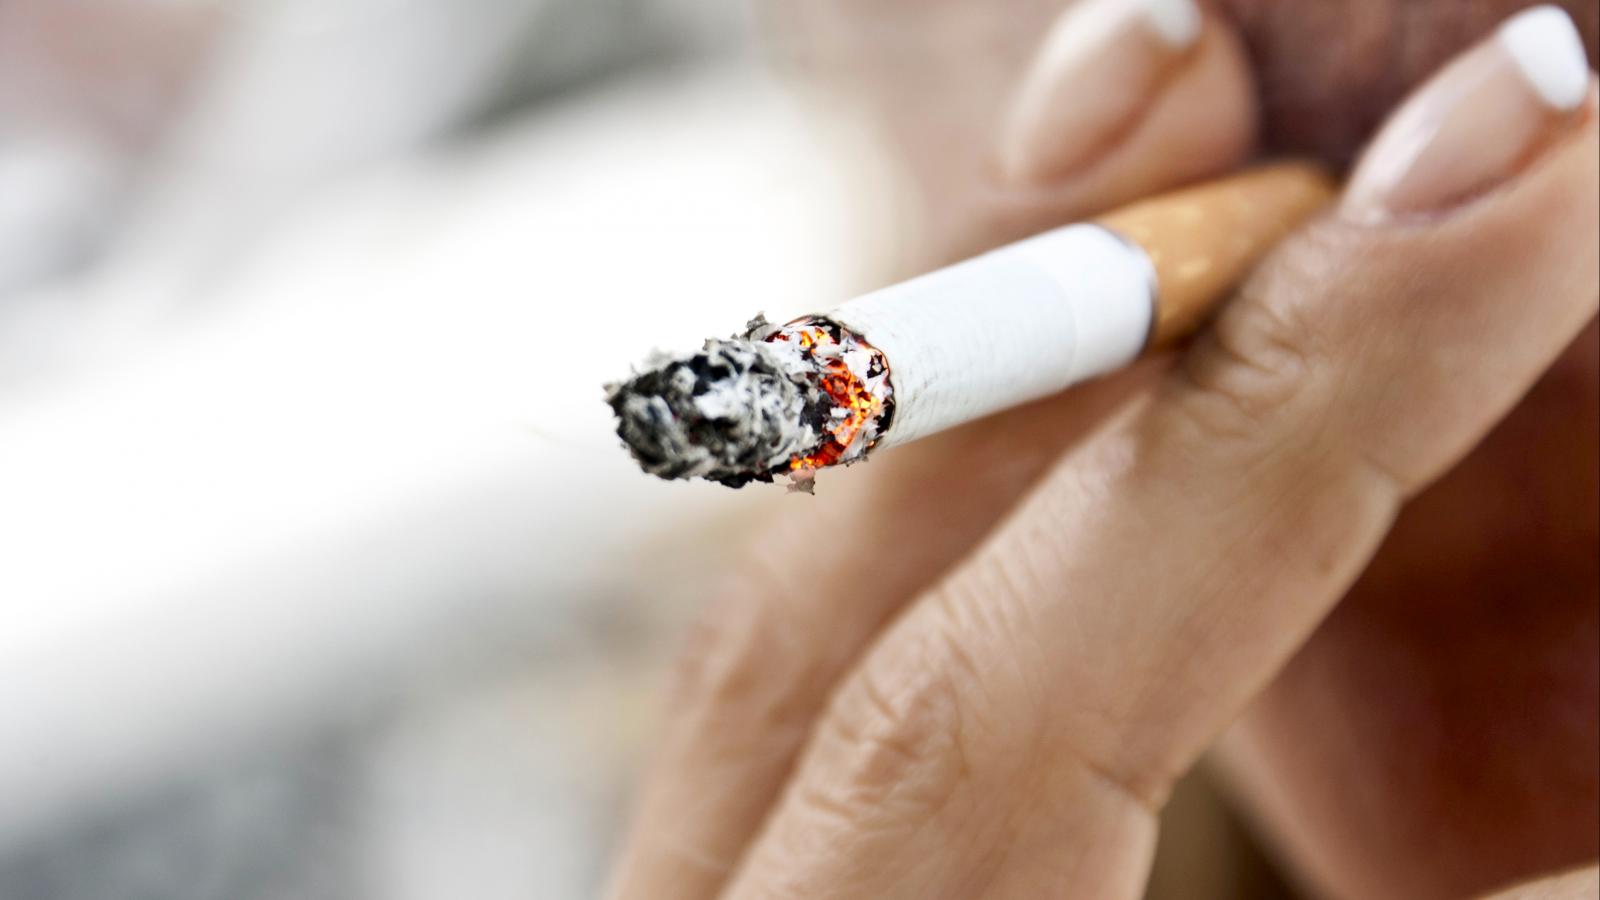 What's in a cigarette? | Irish Cancer Society